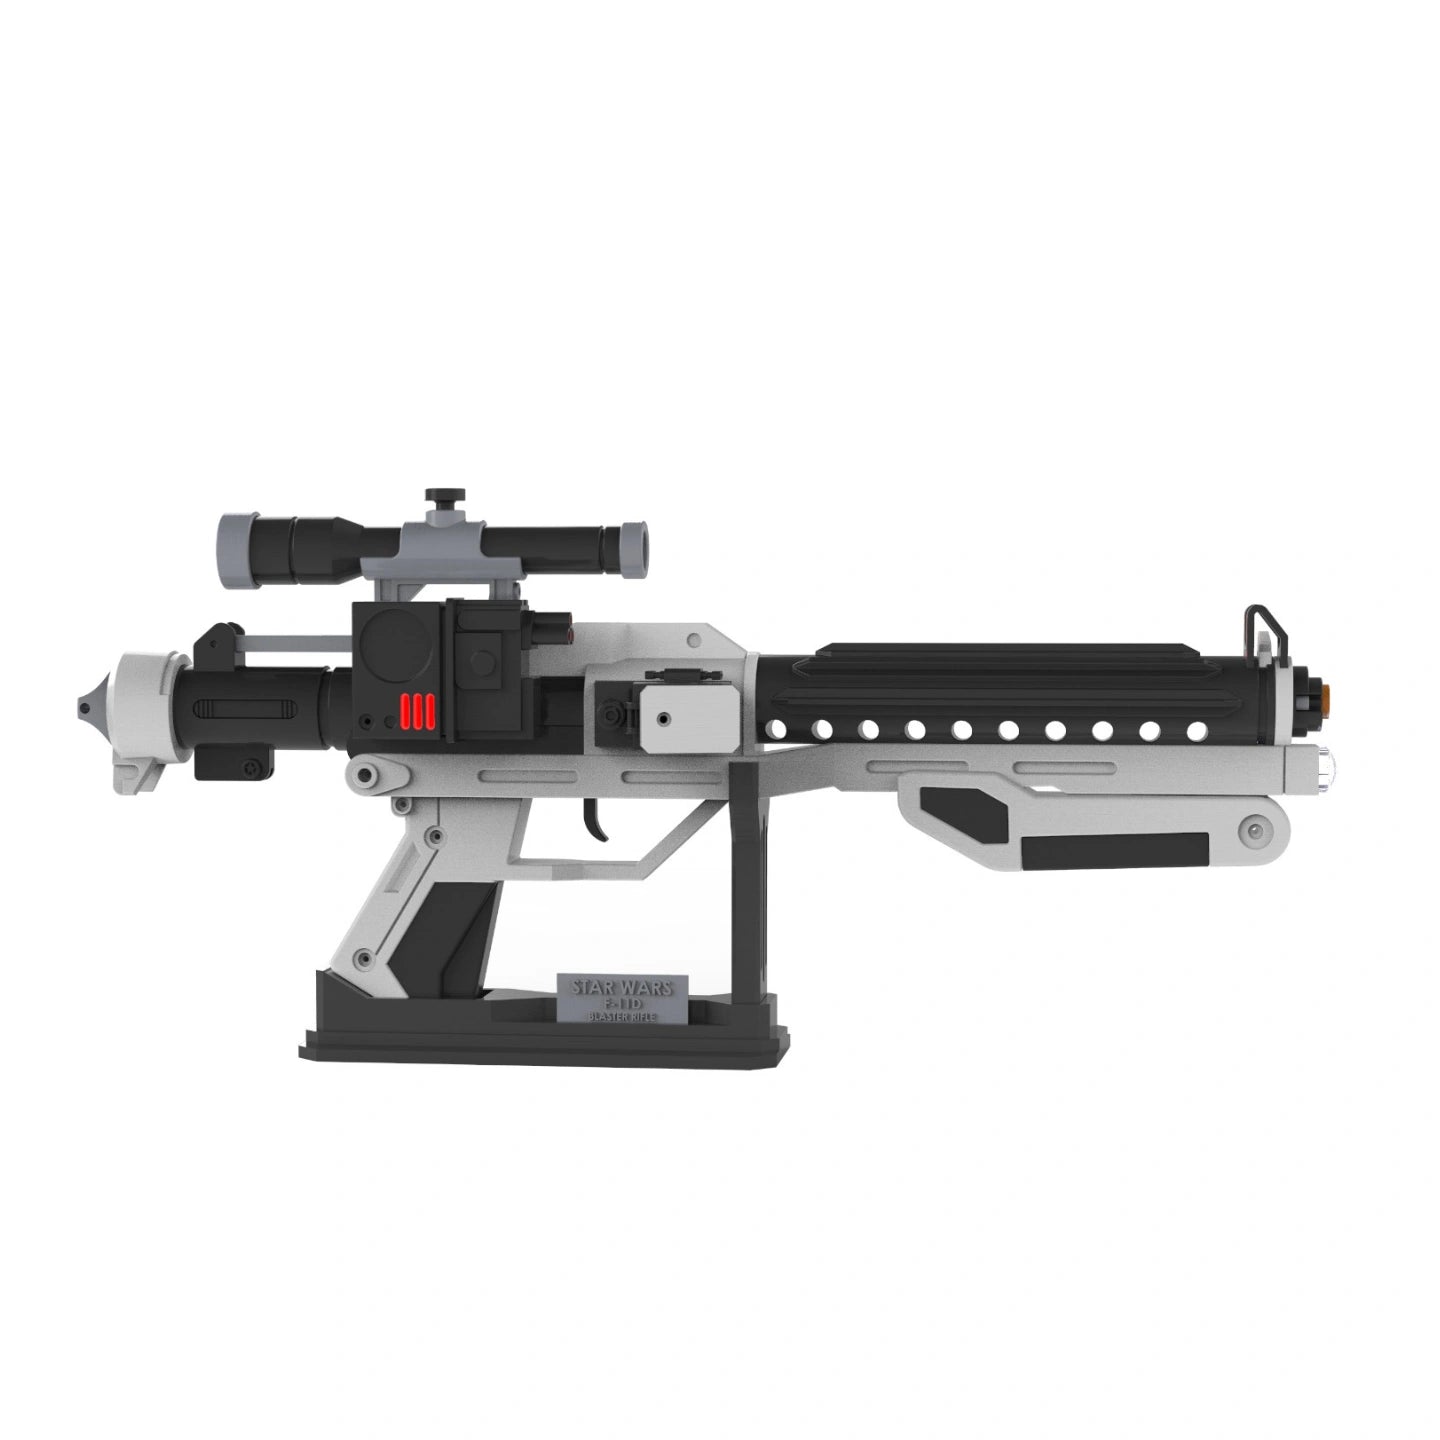 F-11D Blaster Rifle - Star Wars - DIY KIT - With Stand